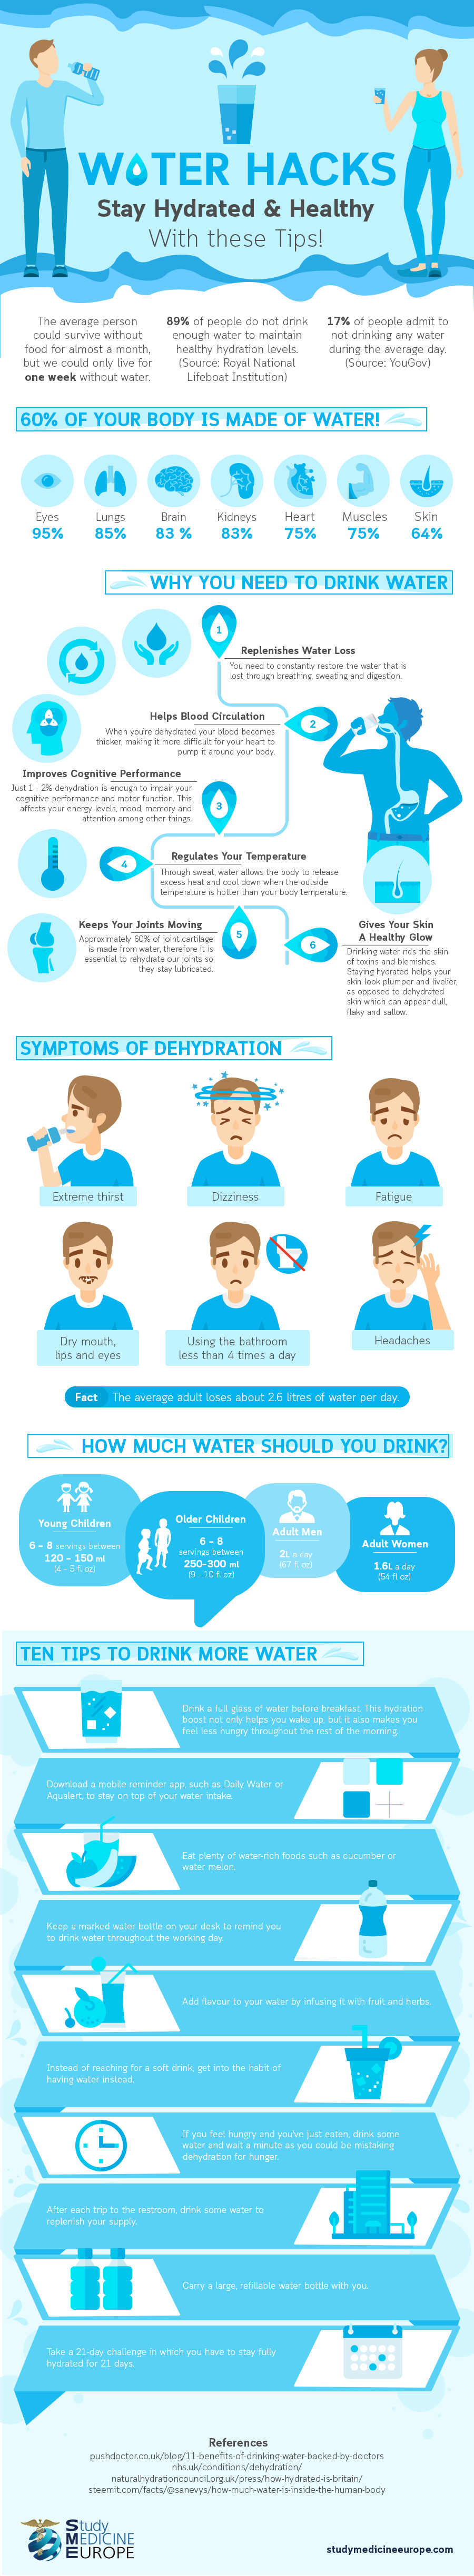 Water Hacks To Stay Hydrated